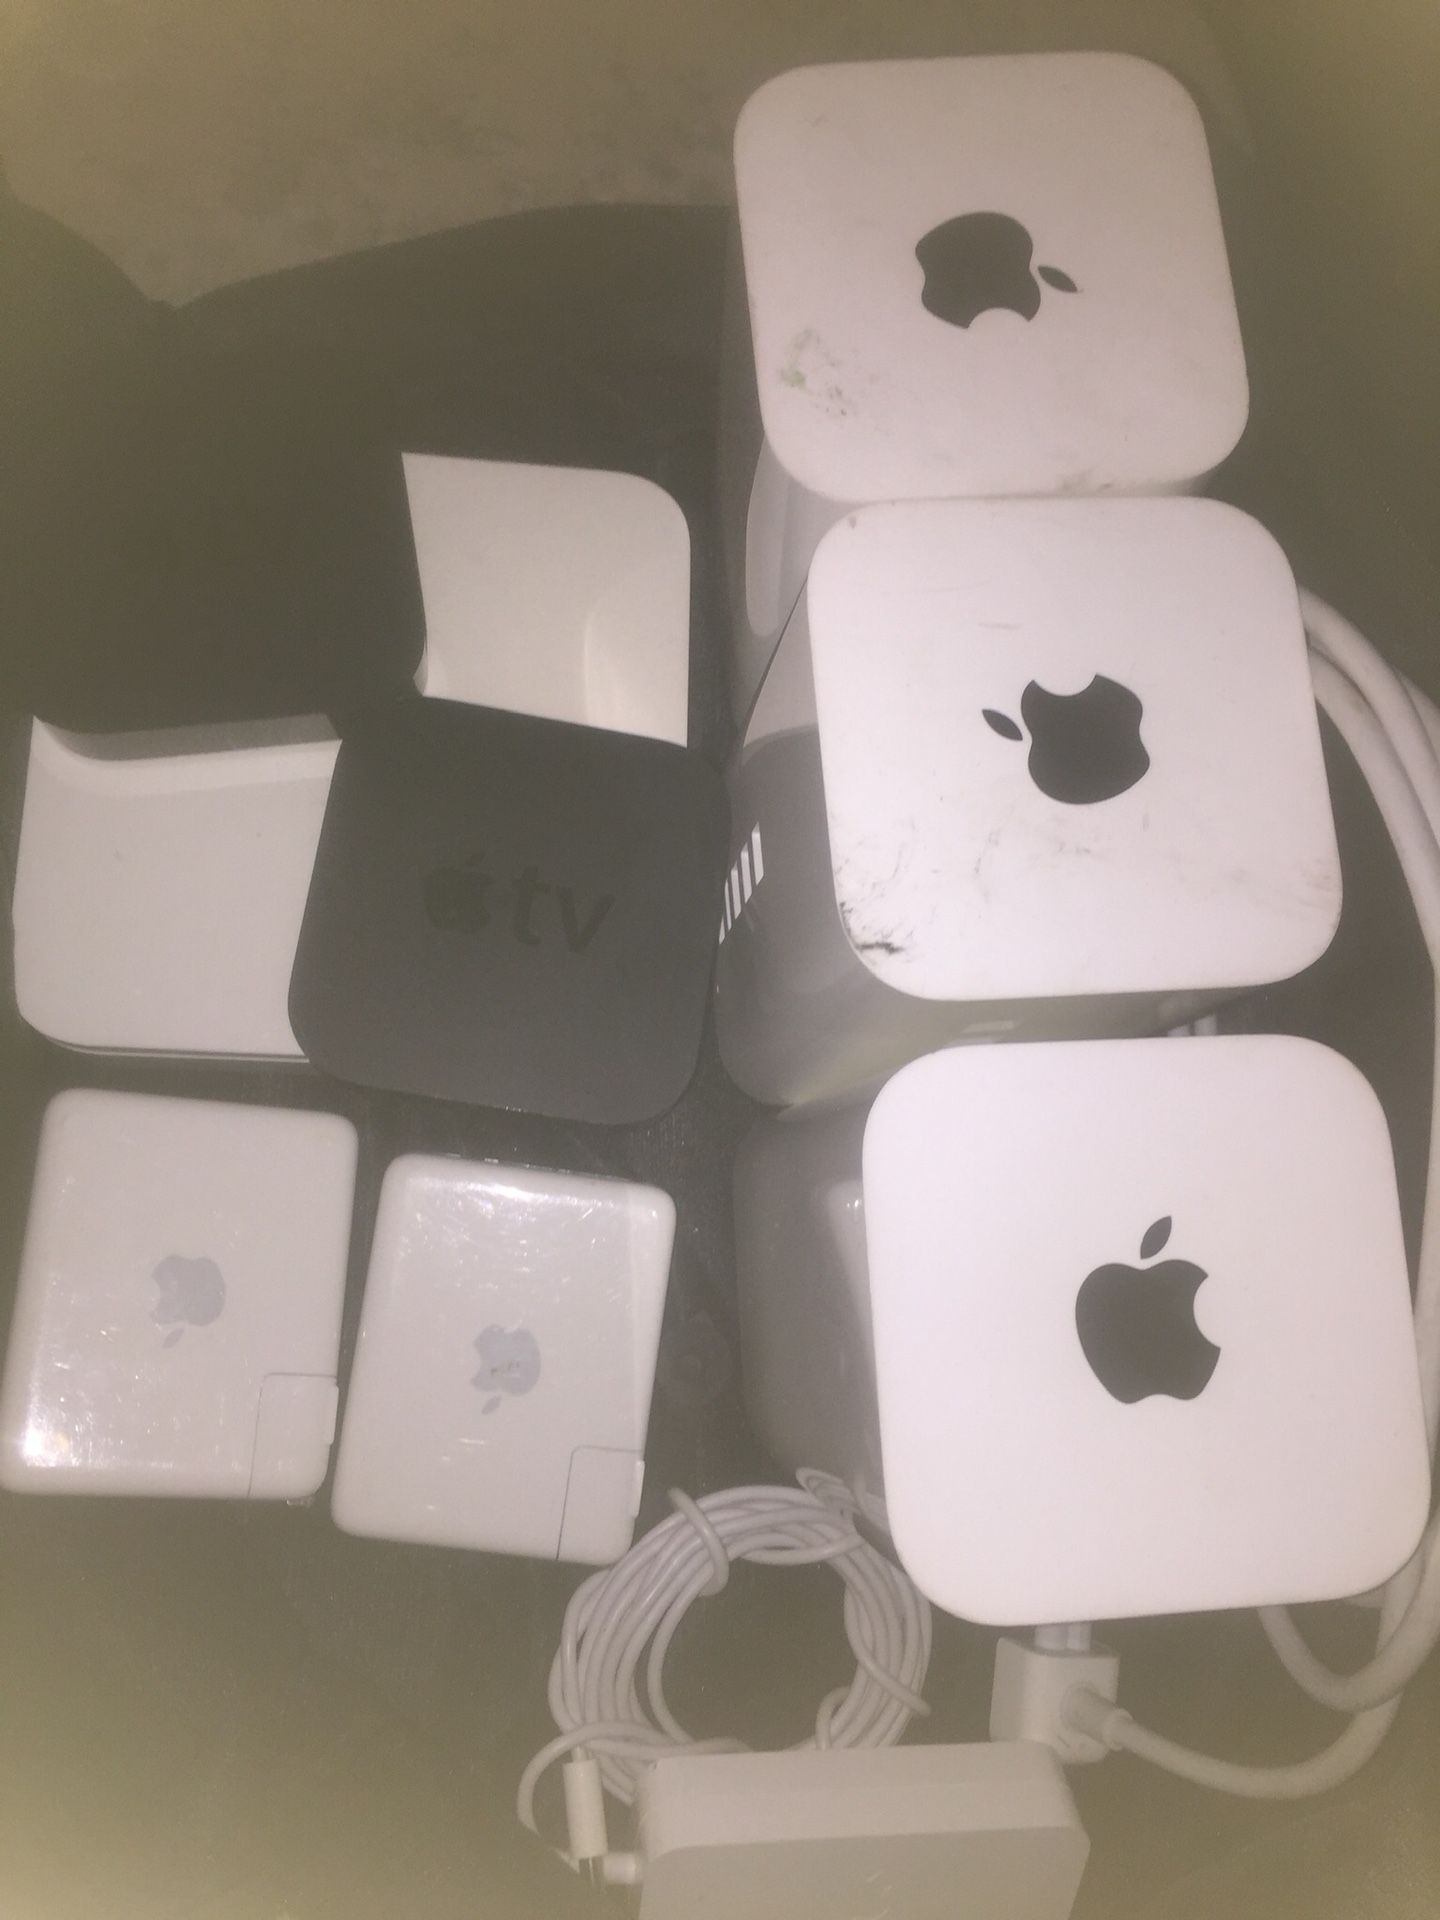 Apple TV, Apple Extreme Airport Basestation, Apple Airport Express Home Networking Devices